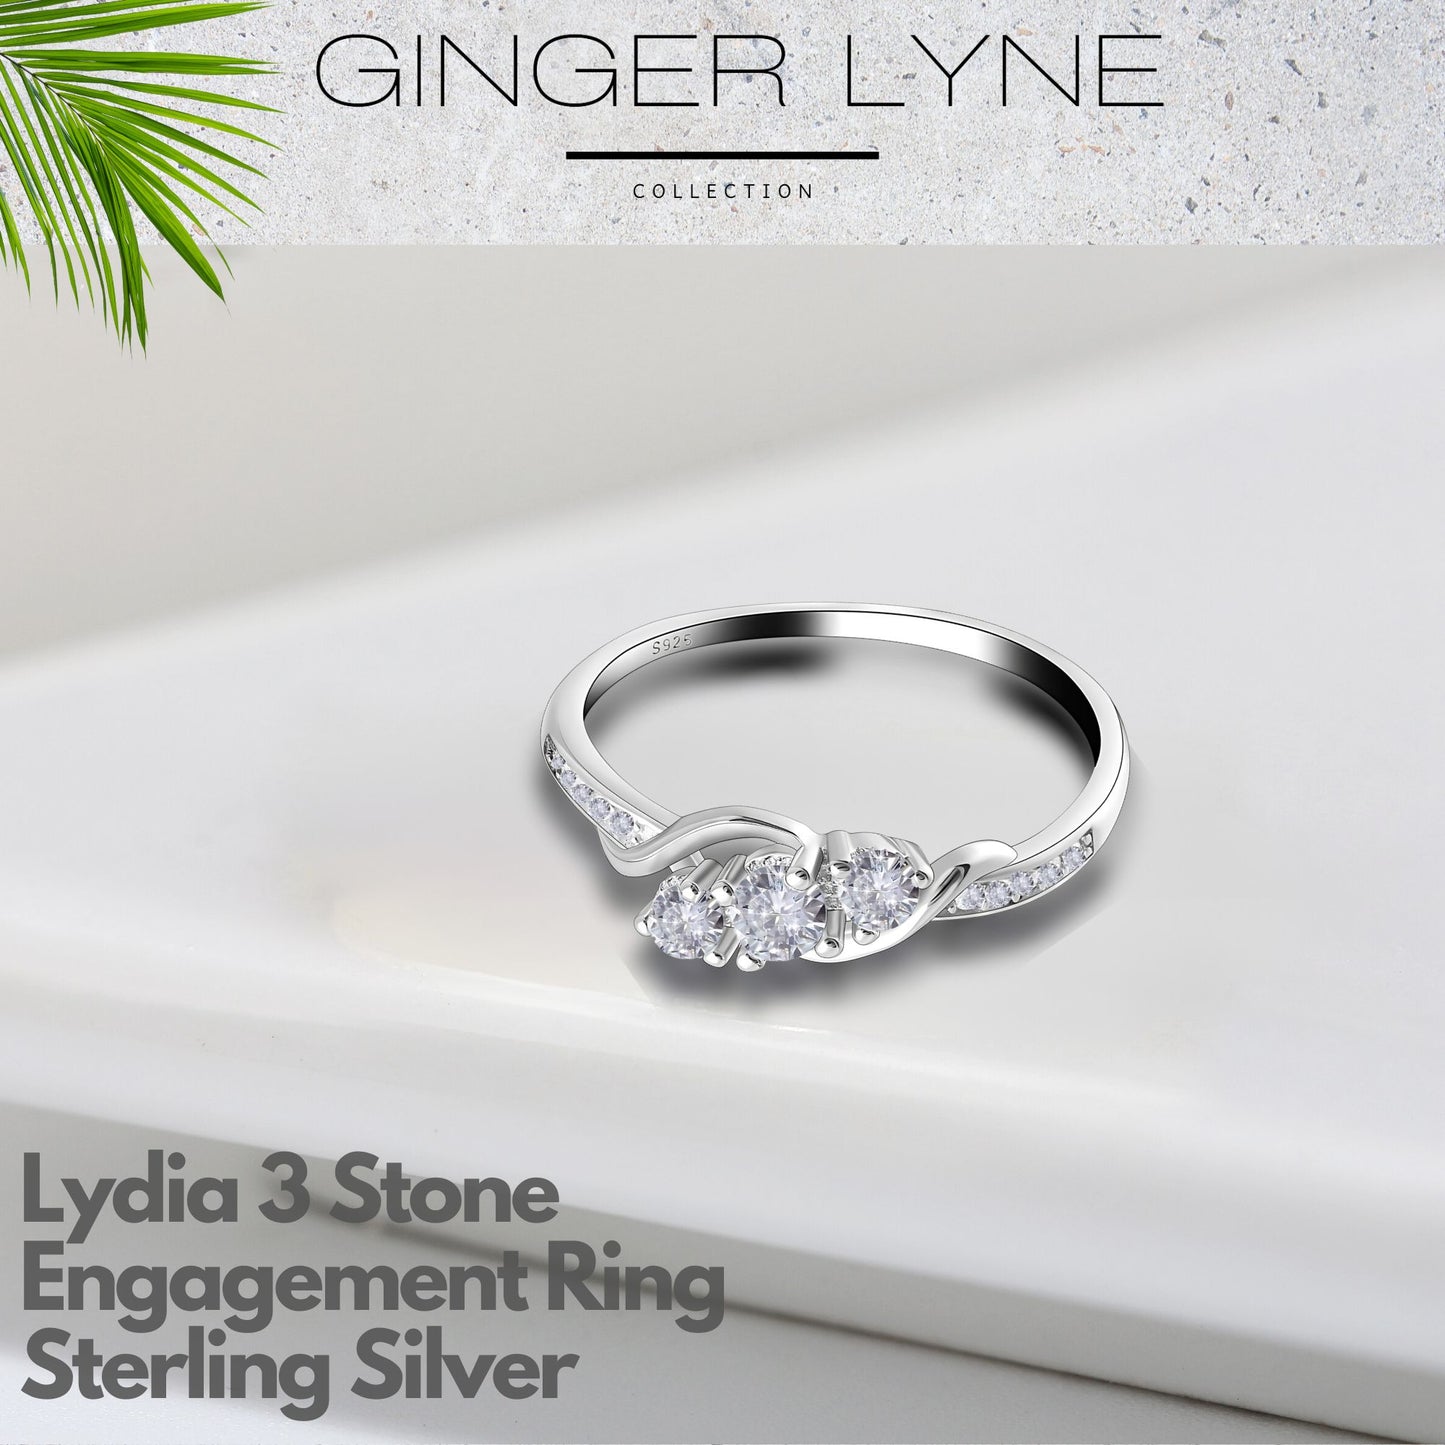 3 Stone Engagement Ring for Women,  Sterling Silver Cubic Zirconia Wedding  Ring for Her Ginger Lyne Collection